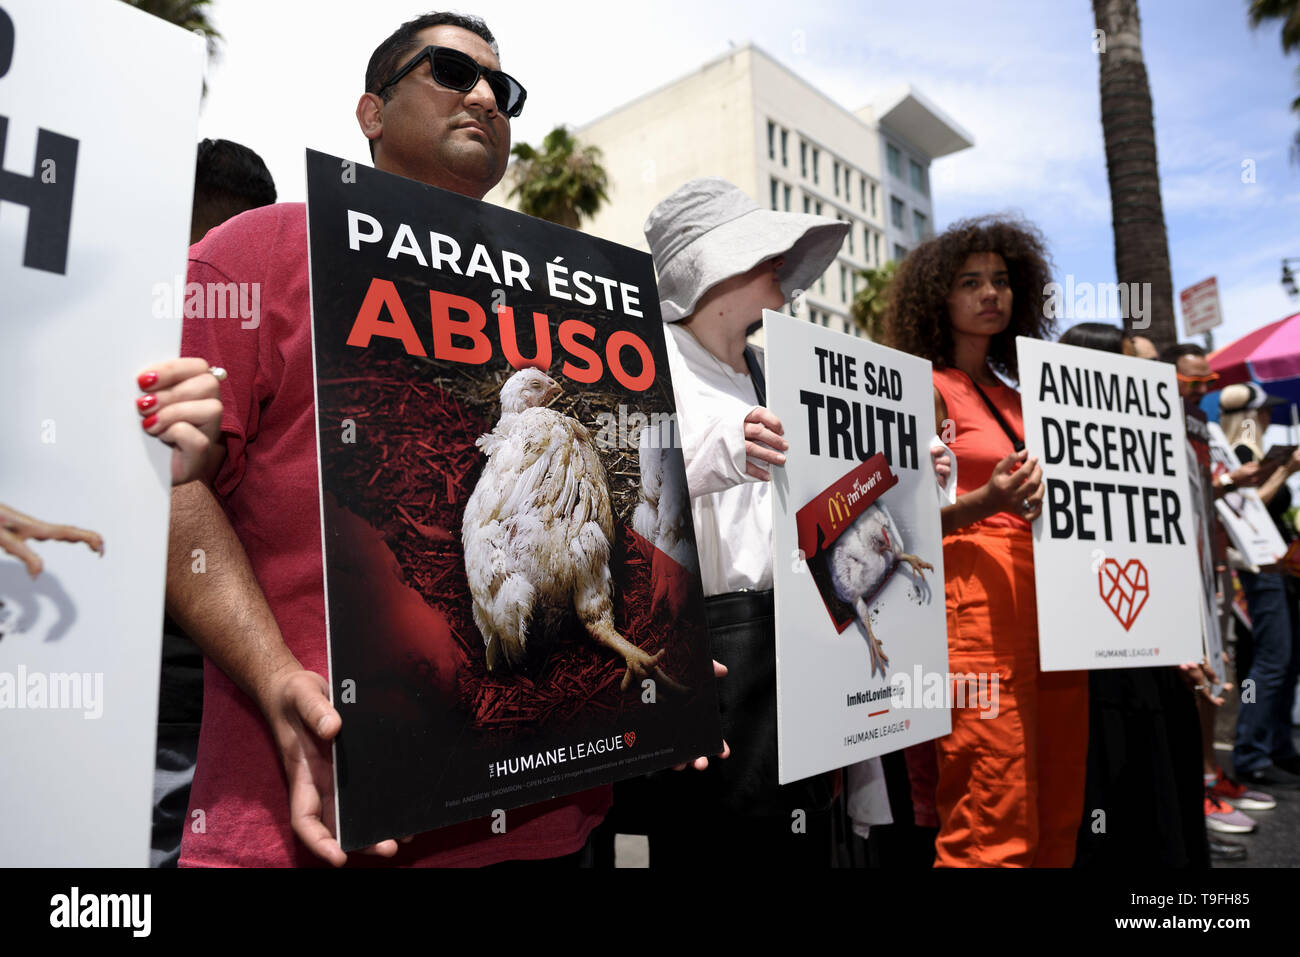 Los Angeles, CA, USA. 27th Feb, 2019. Animal rights activists seen holding placards during a protest of what they called, animal cruelty in the chicken supply chain of McDonald's. The protest took place in front of a McDonald's fast food restaurant on the Hollywood Walk of Fame in Los Angeles. Credit: Ronen Tivony/SOPA Images/ZUMA Wire/Alamy Live News Stock Photo